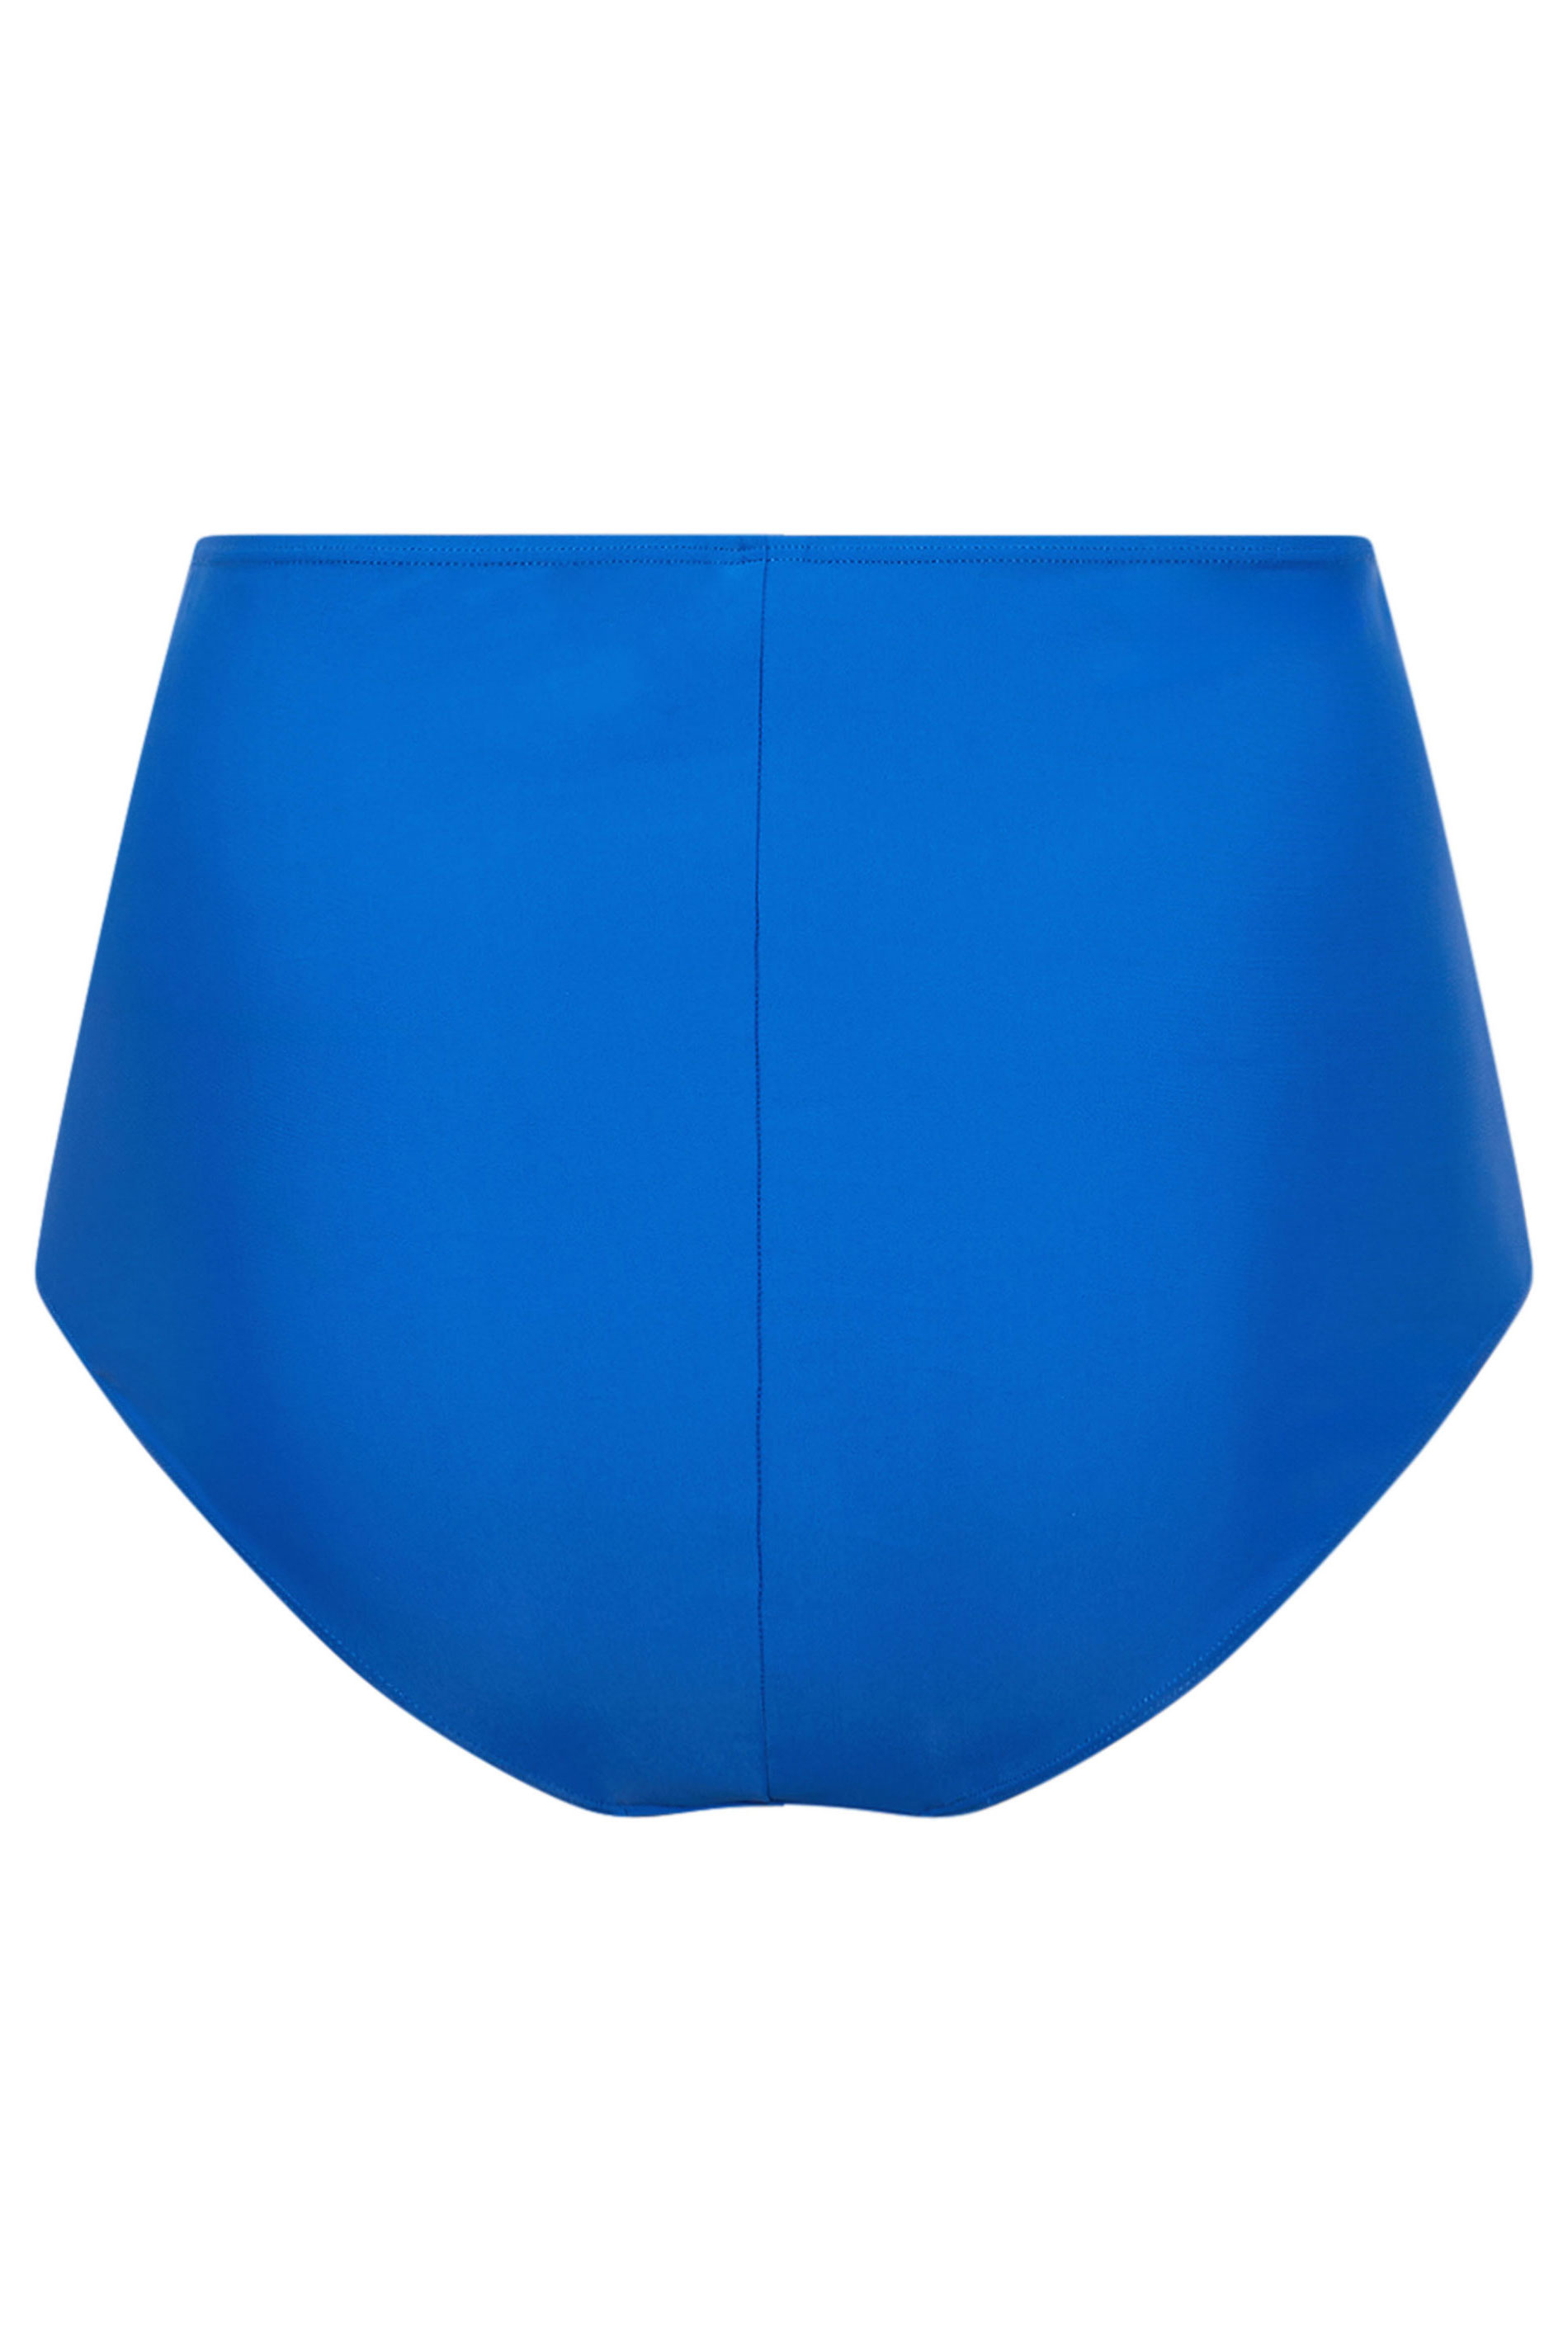 YOURS Plus Size Cobalt Blue Super High Waisted Tummy Control Bikini Briefs | Yours Clothing 2